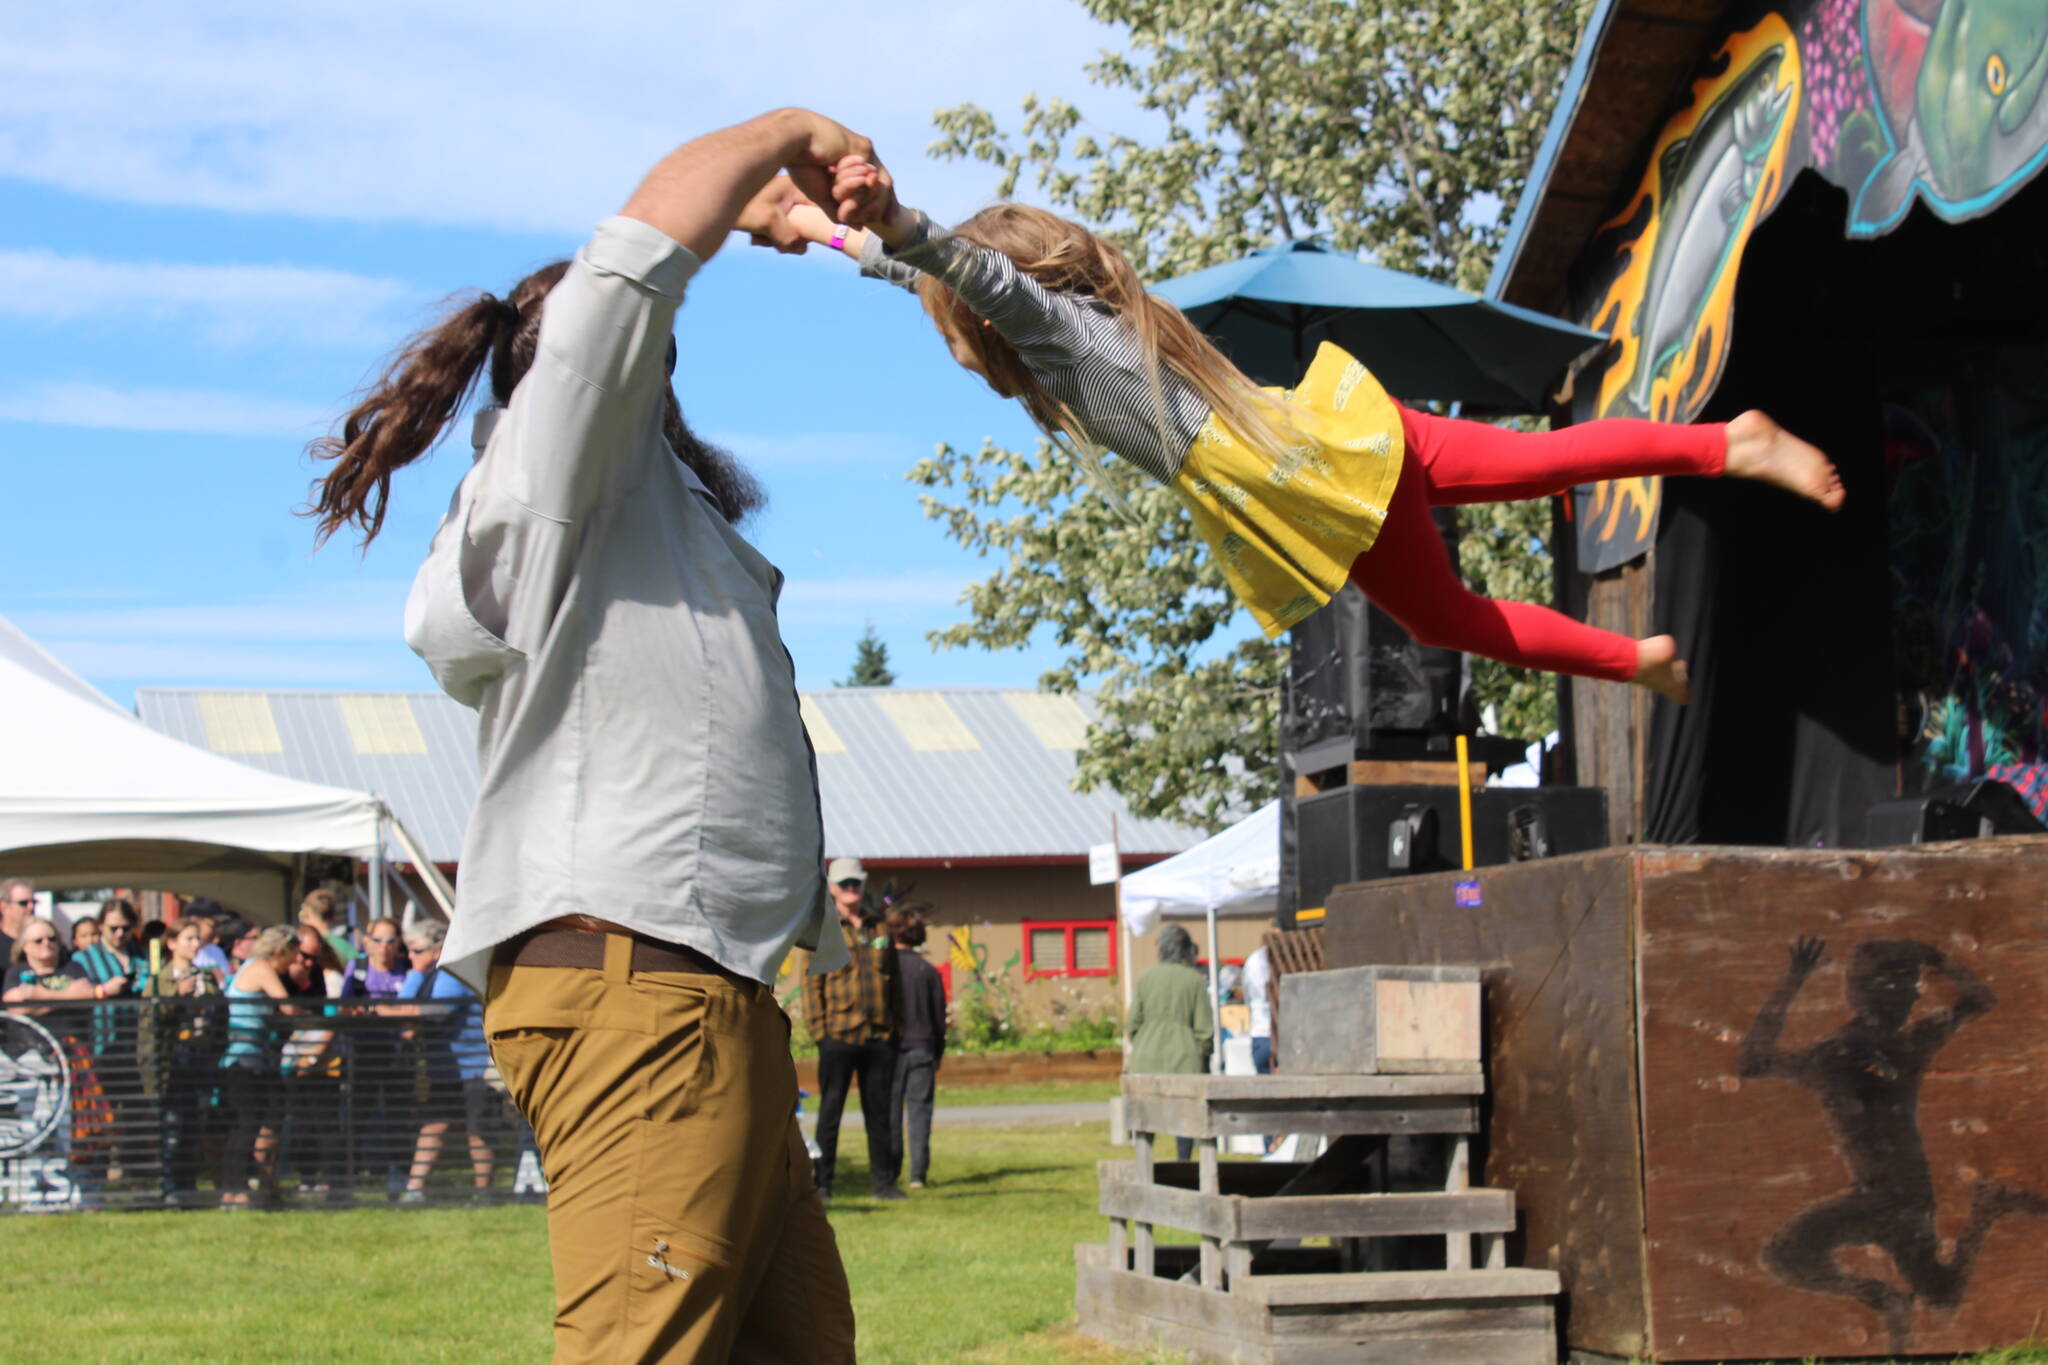 People gather in Ninilchik, Alaska on Friday, Aug. 5, 2022, for Salmonfest, an annual event that raises awareness about salmon-related causes. (Camille Botello/Peninsula Clarion)